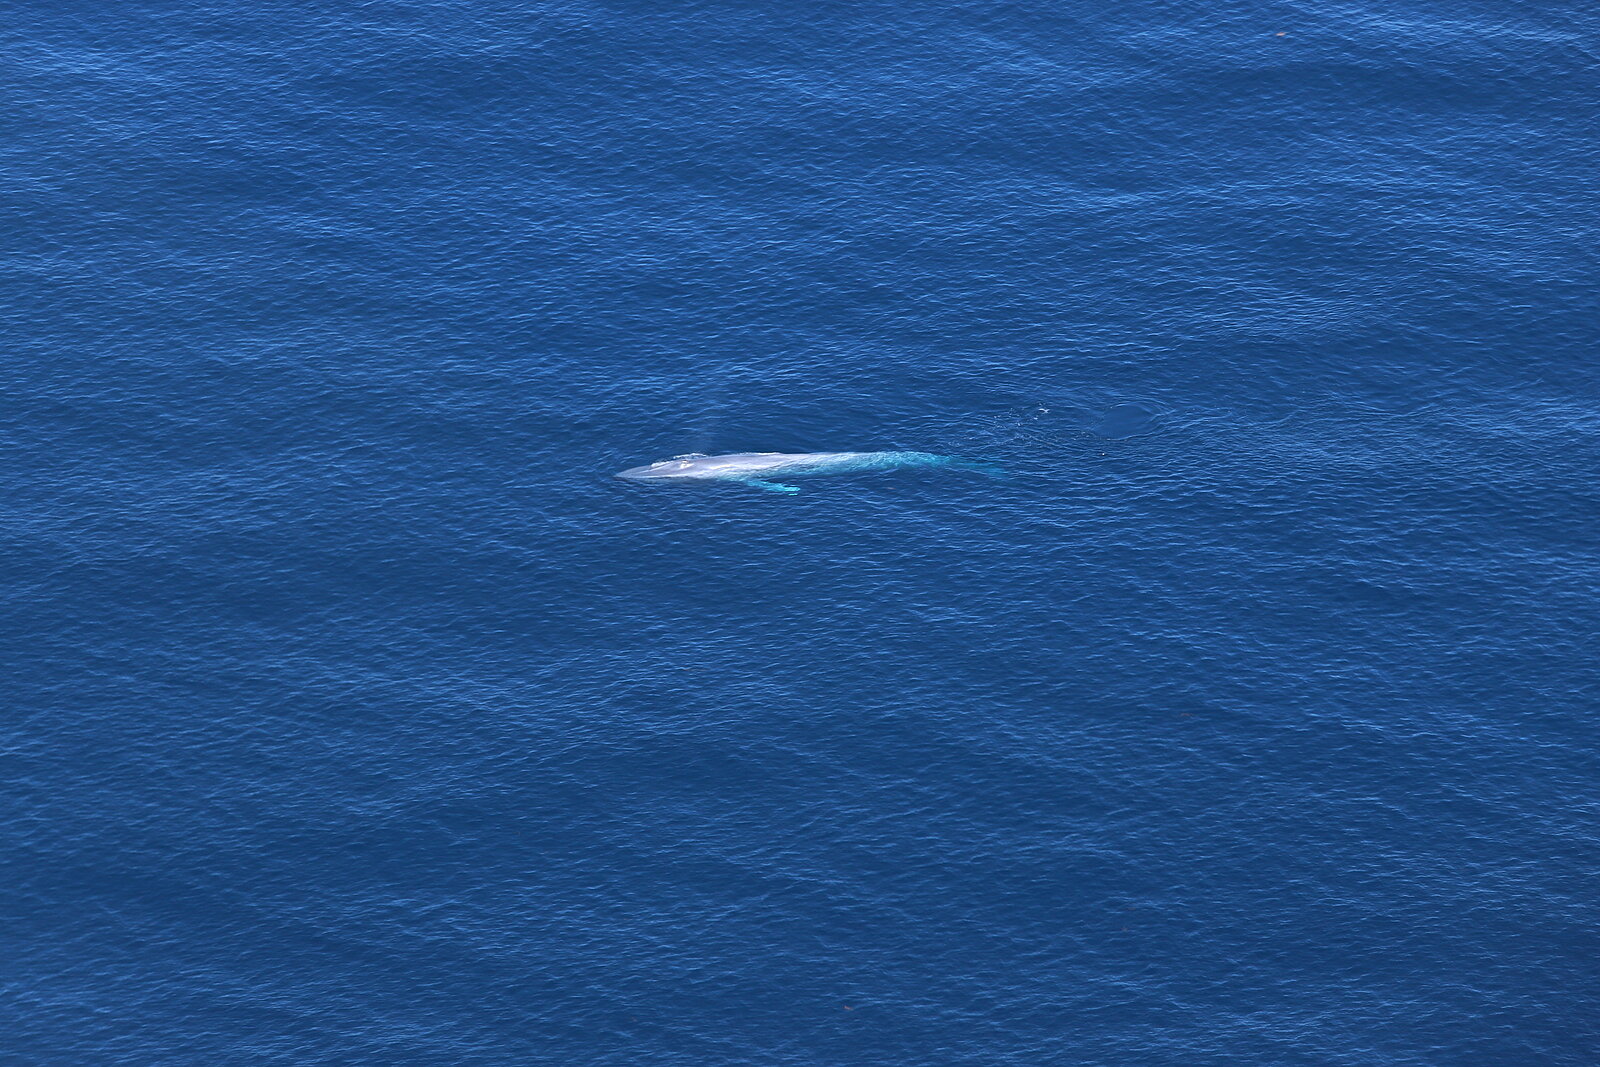 Blue whale swimming at the surface